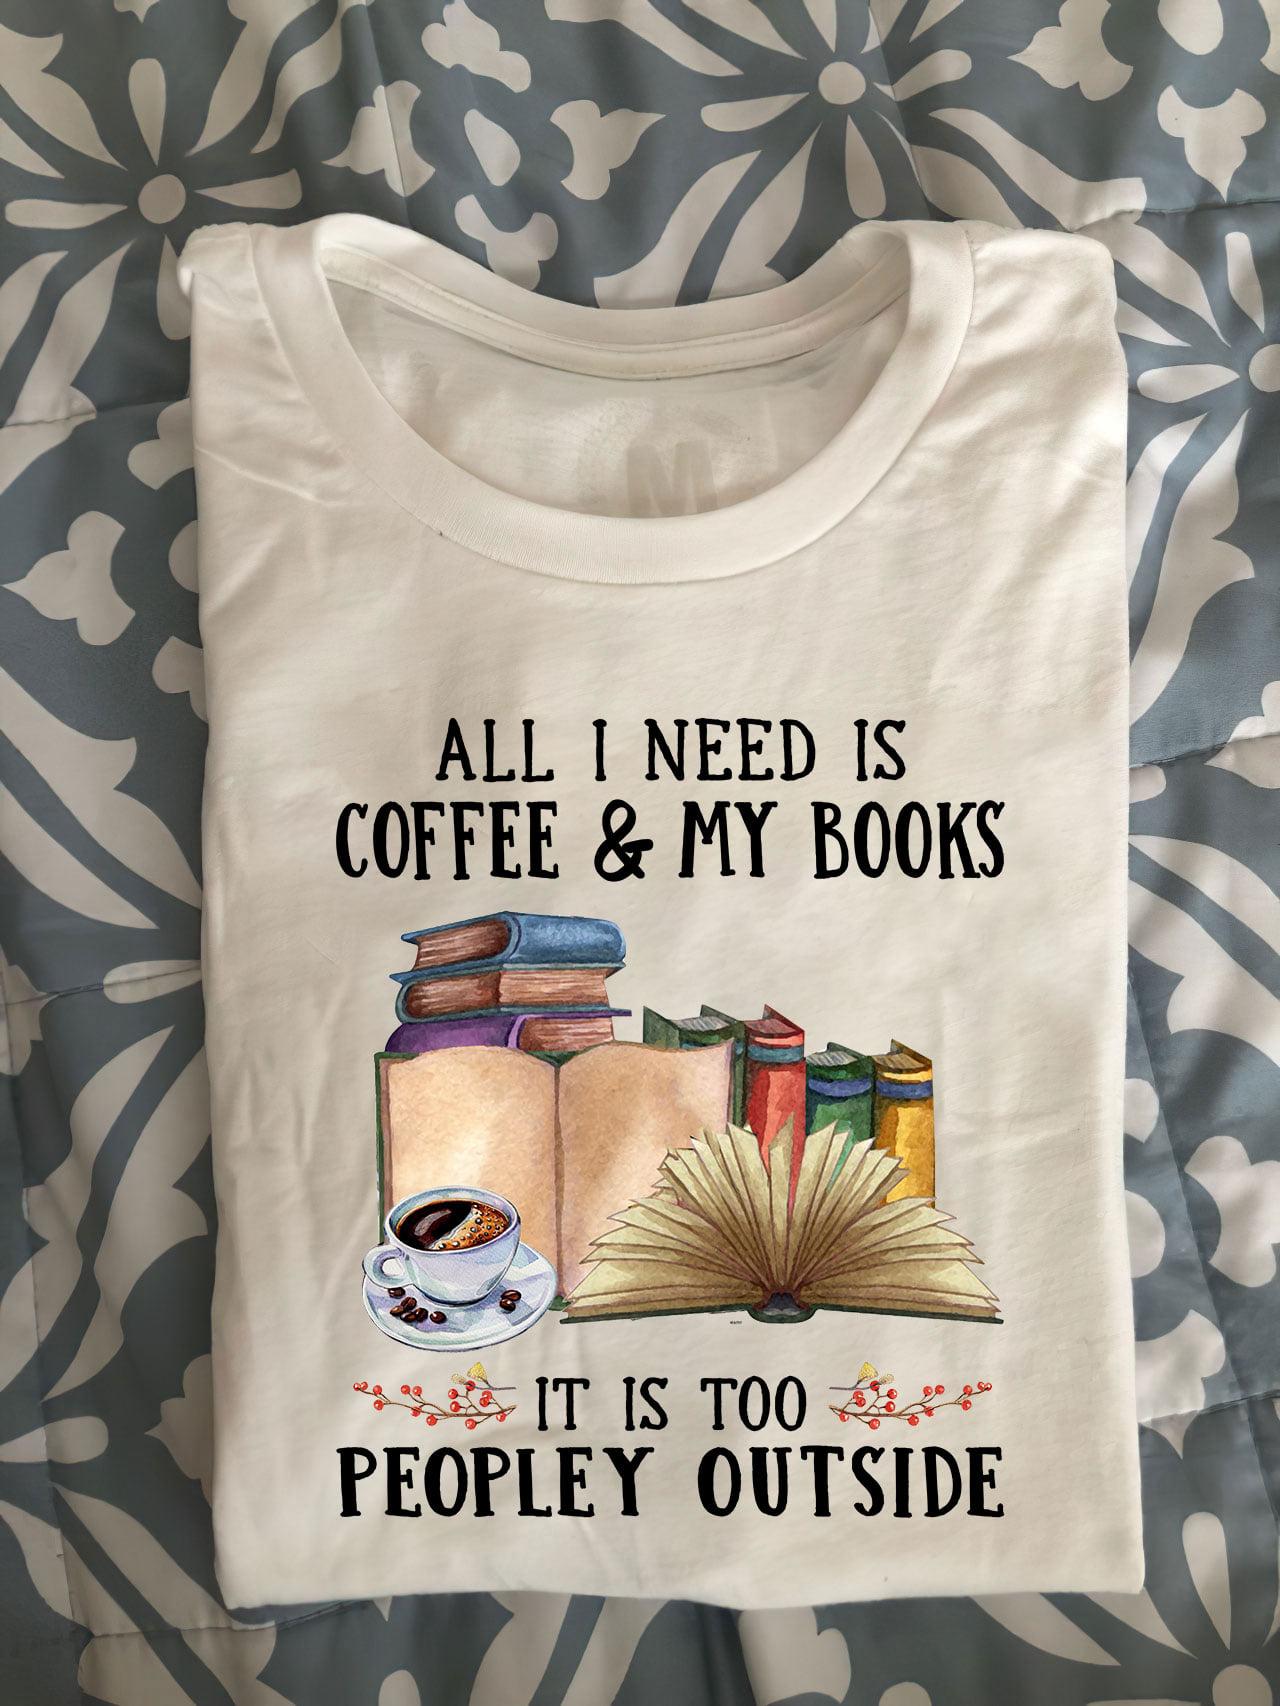 All I need is coffee and my books, It is too peopley outside - Coffee and book, Book reader T-shirt